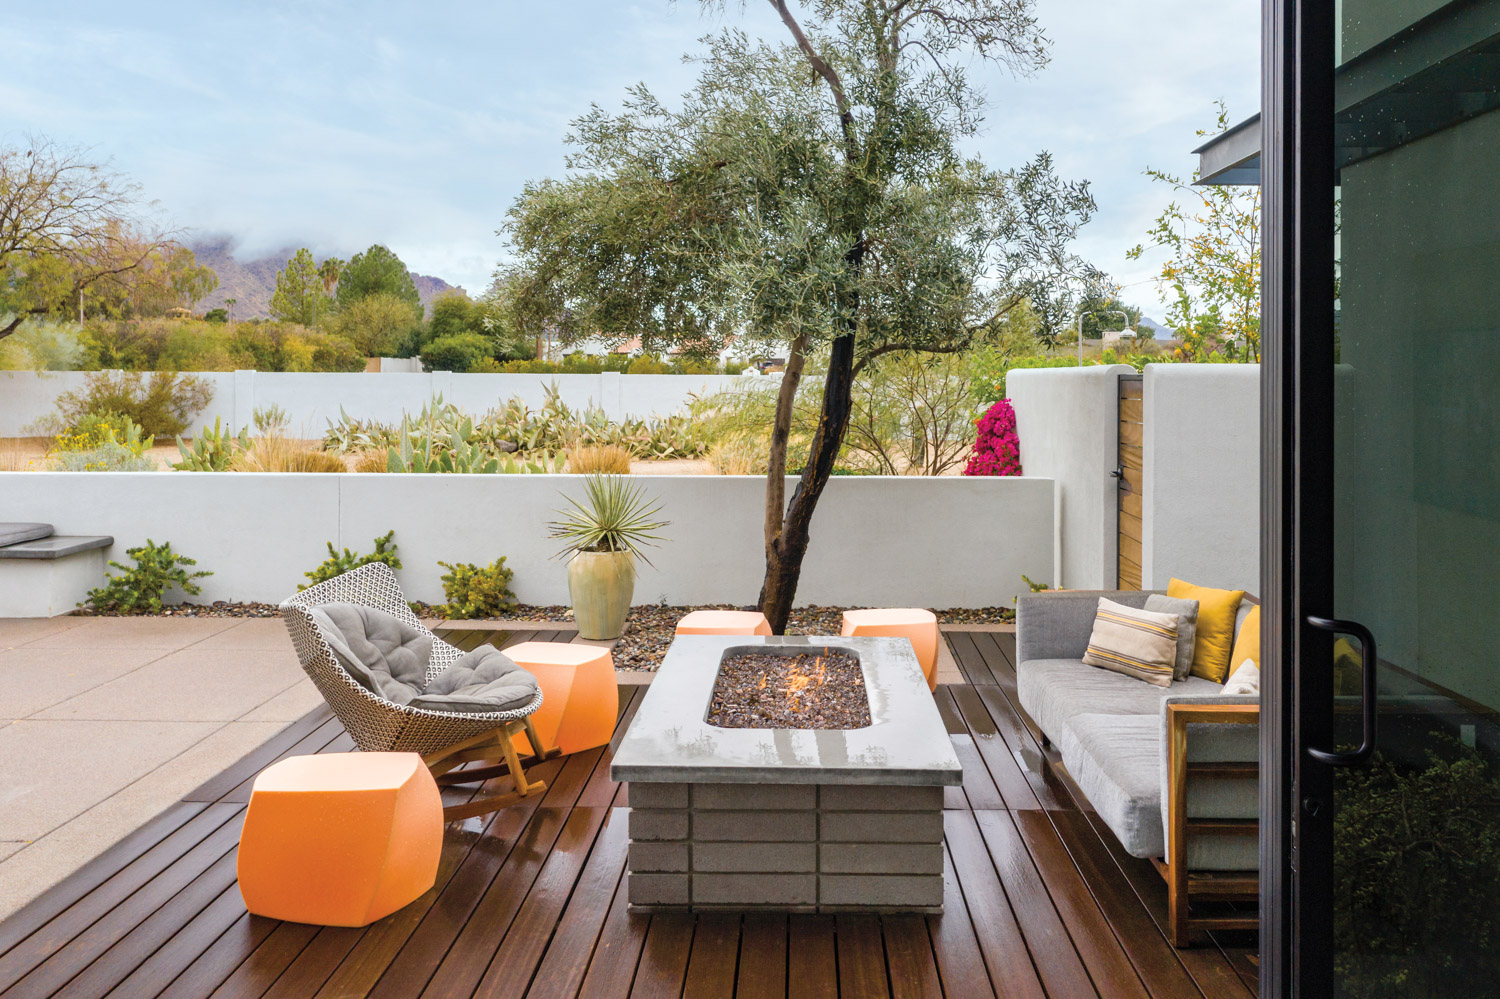 Outdoor living space with deck, fire pit, orange accents and walled garden.